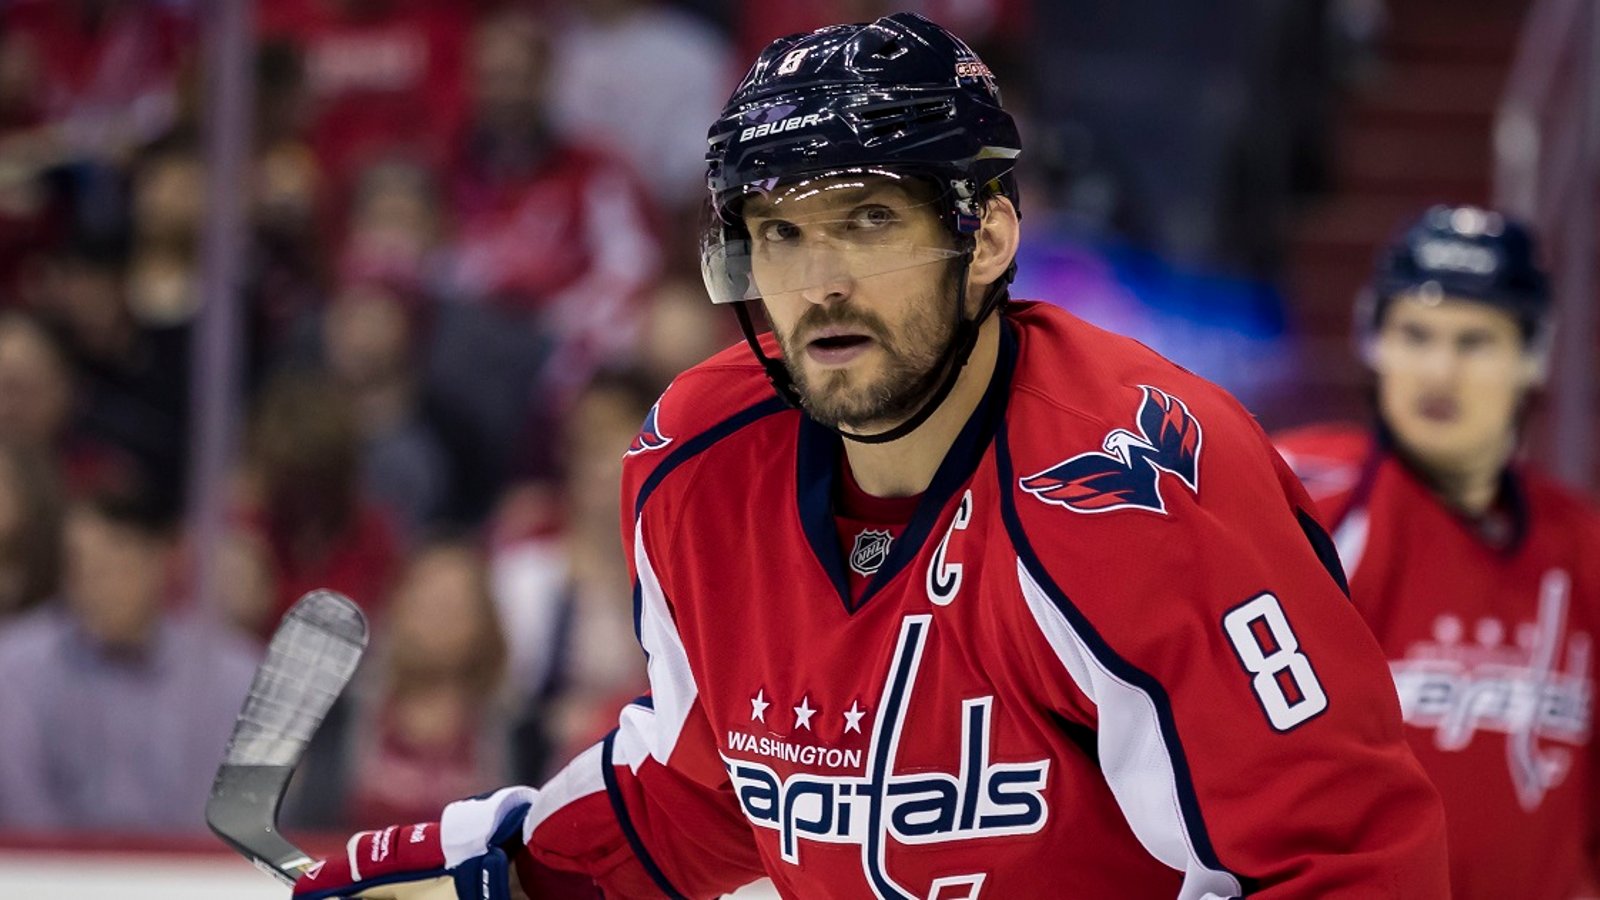 Capitals insider shares big update on Alex Ovechkin trade rumors.